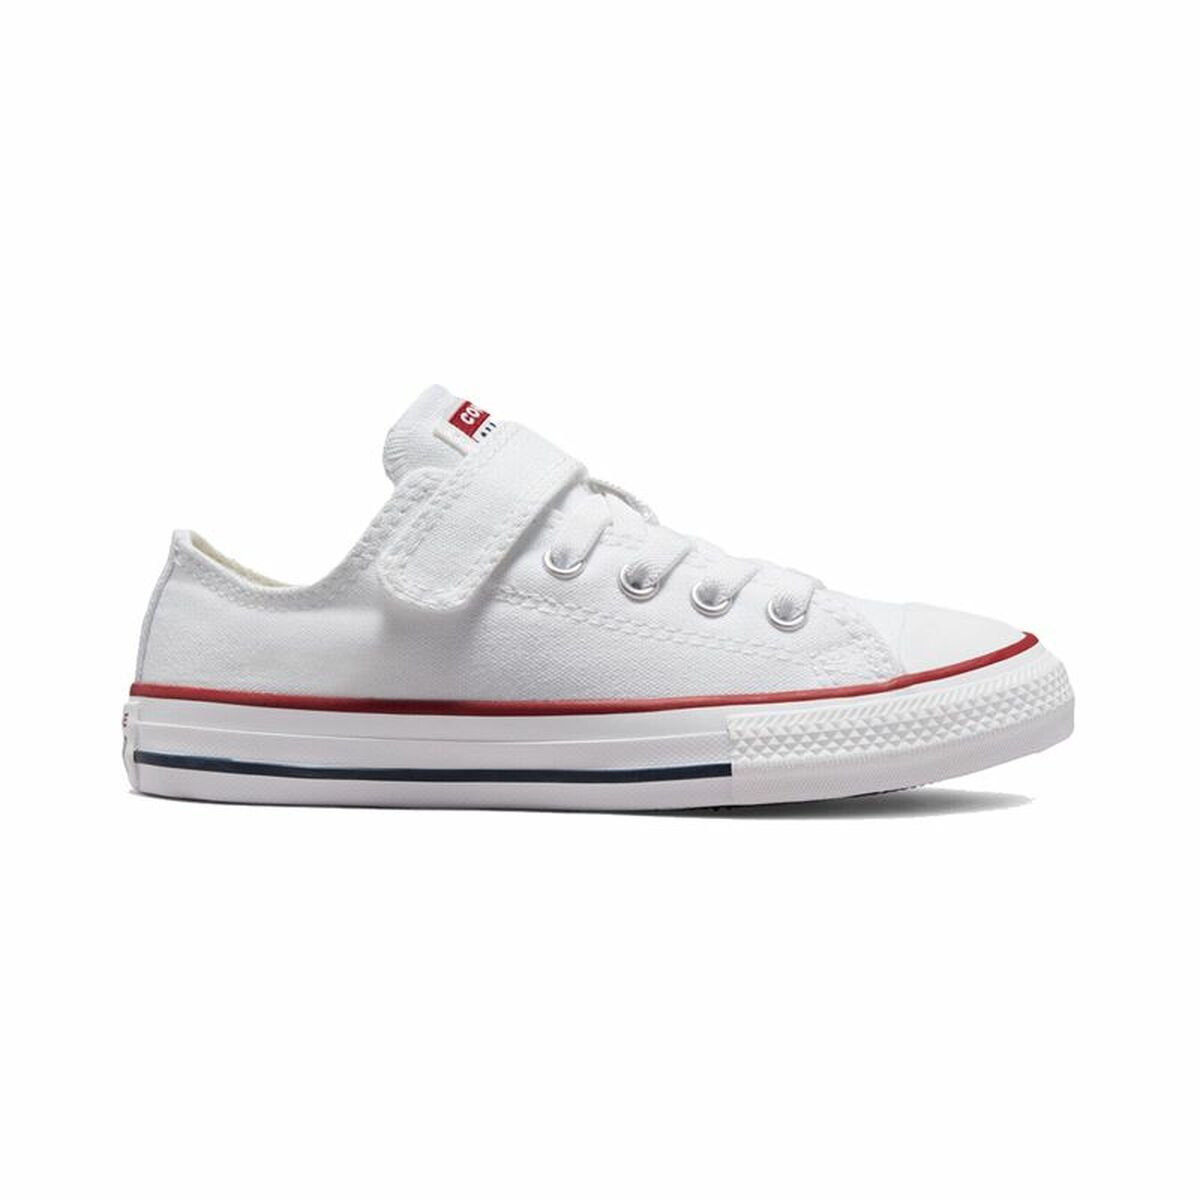 Sports Shoes for Kids Converse All Star Easy-On low White